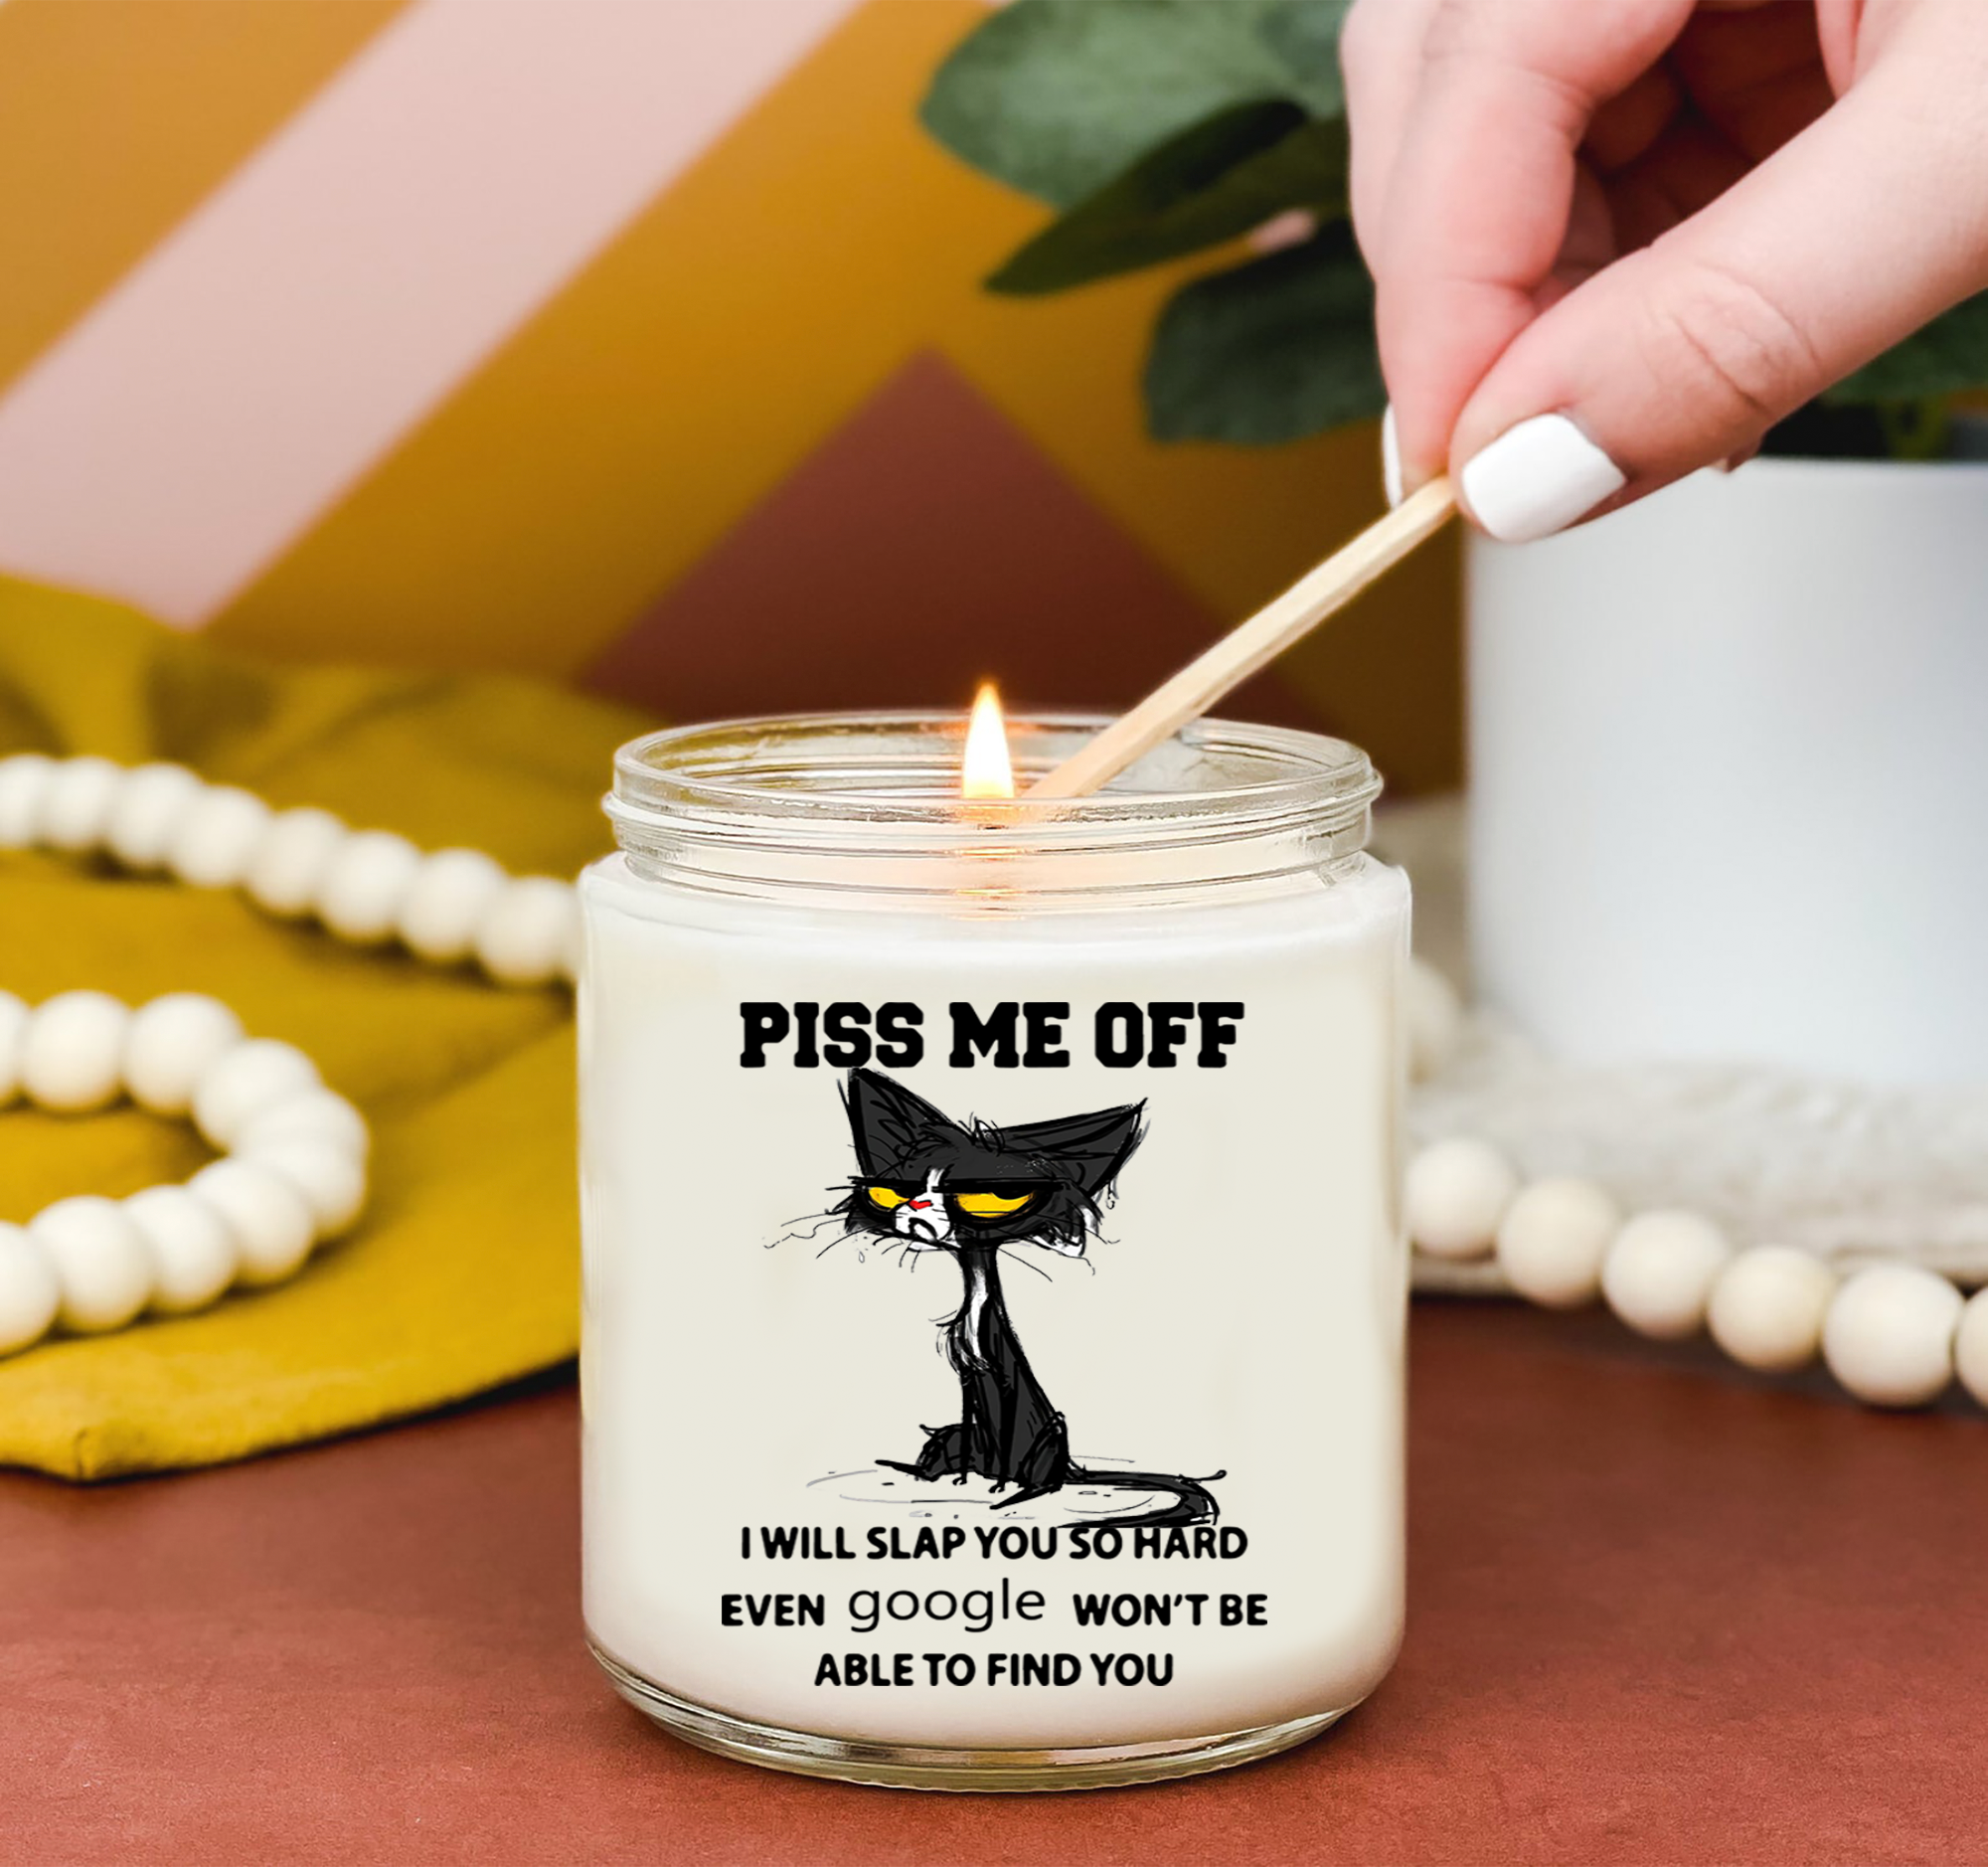 Funny Candle WTF is Happening Candle